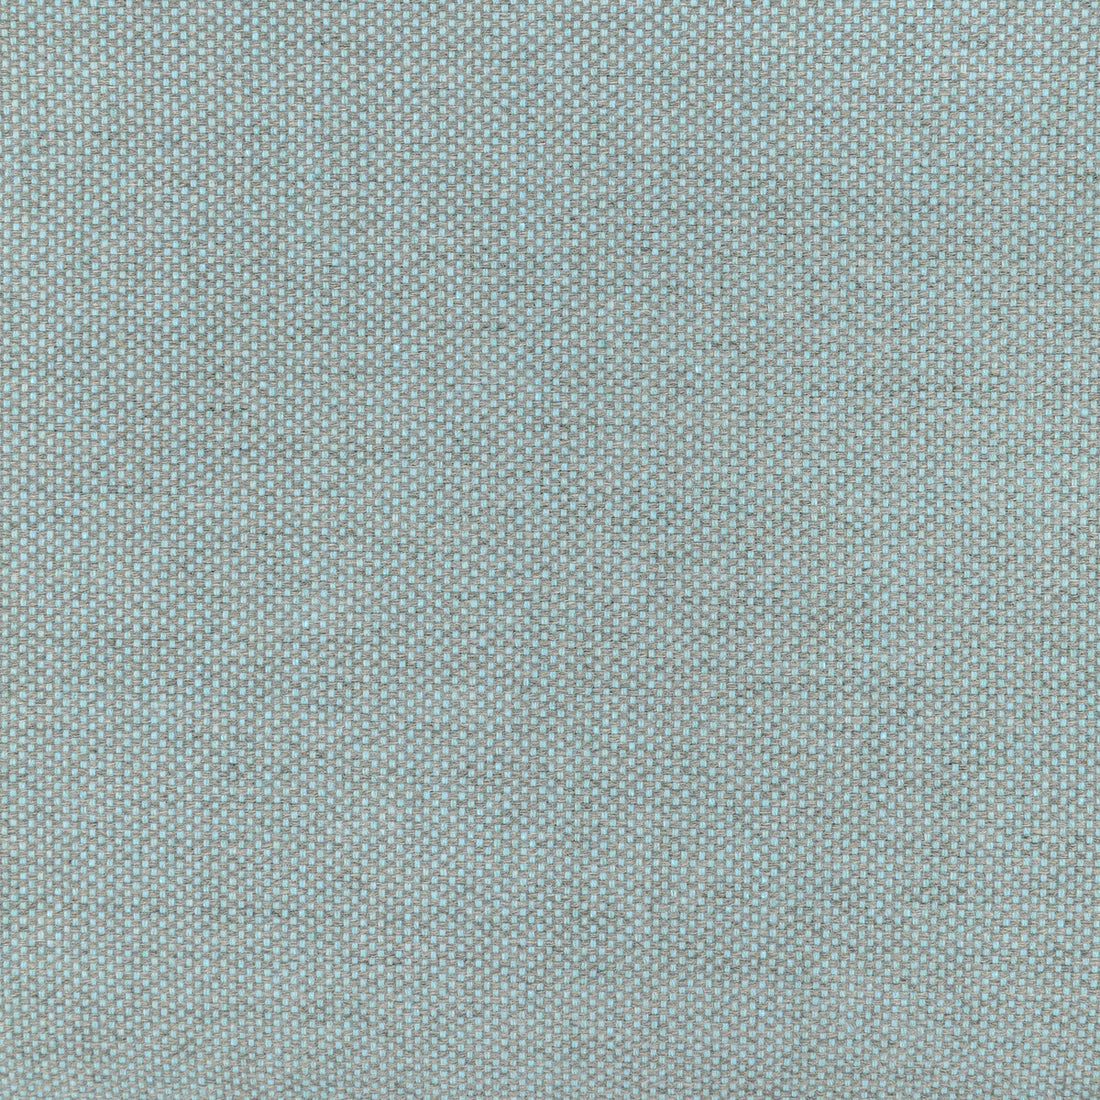 Kravet Basics fabric in 36826-153 color - pattern 36826.153.0 - by Kravet Basics in the Indoor / Outdoor collection